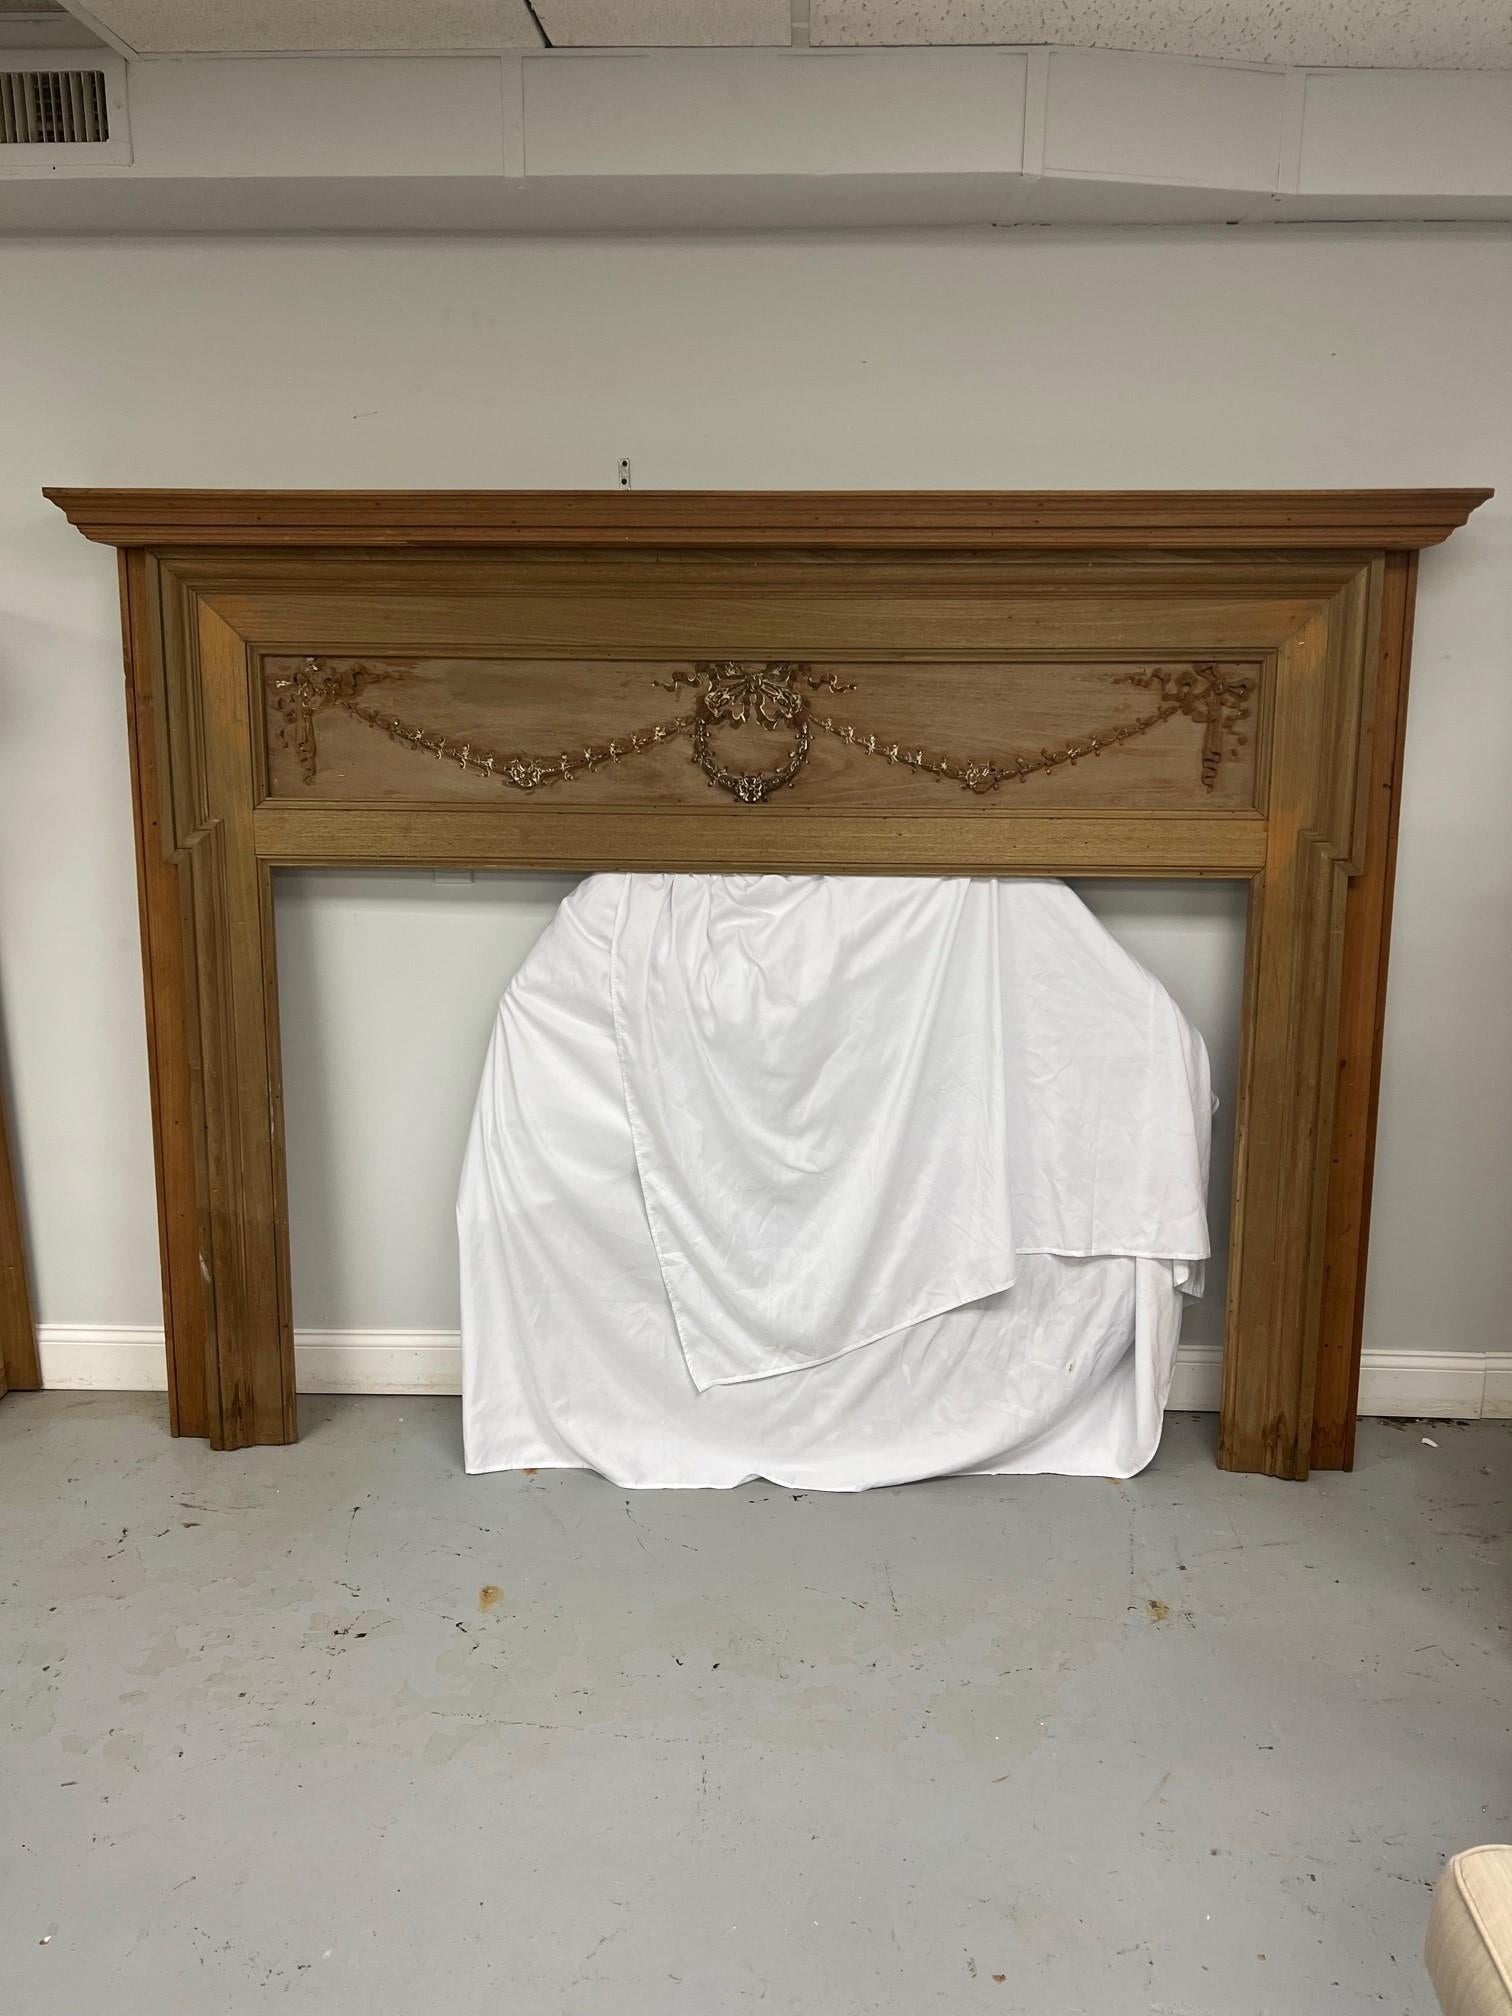 Early 20th century antique wood fireplace mantel with a carved wood center panel. Its hard to tell but I believe the panel is older than the mantel and the mantel was built around the panel many years ago. Salvage from an estate in Western PA. this